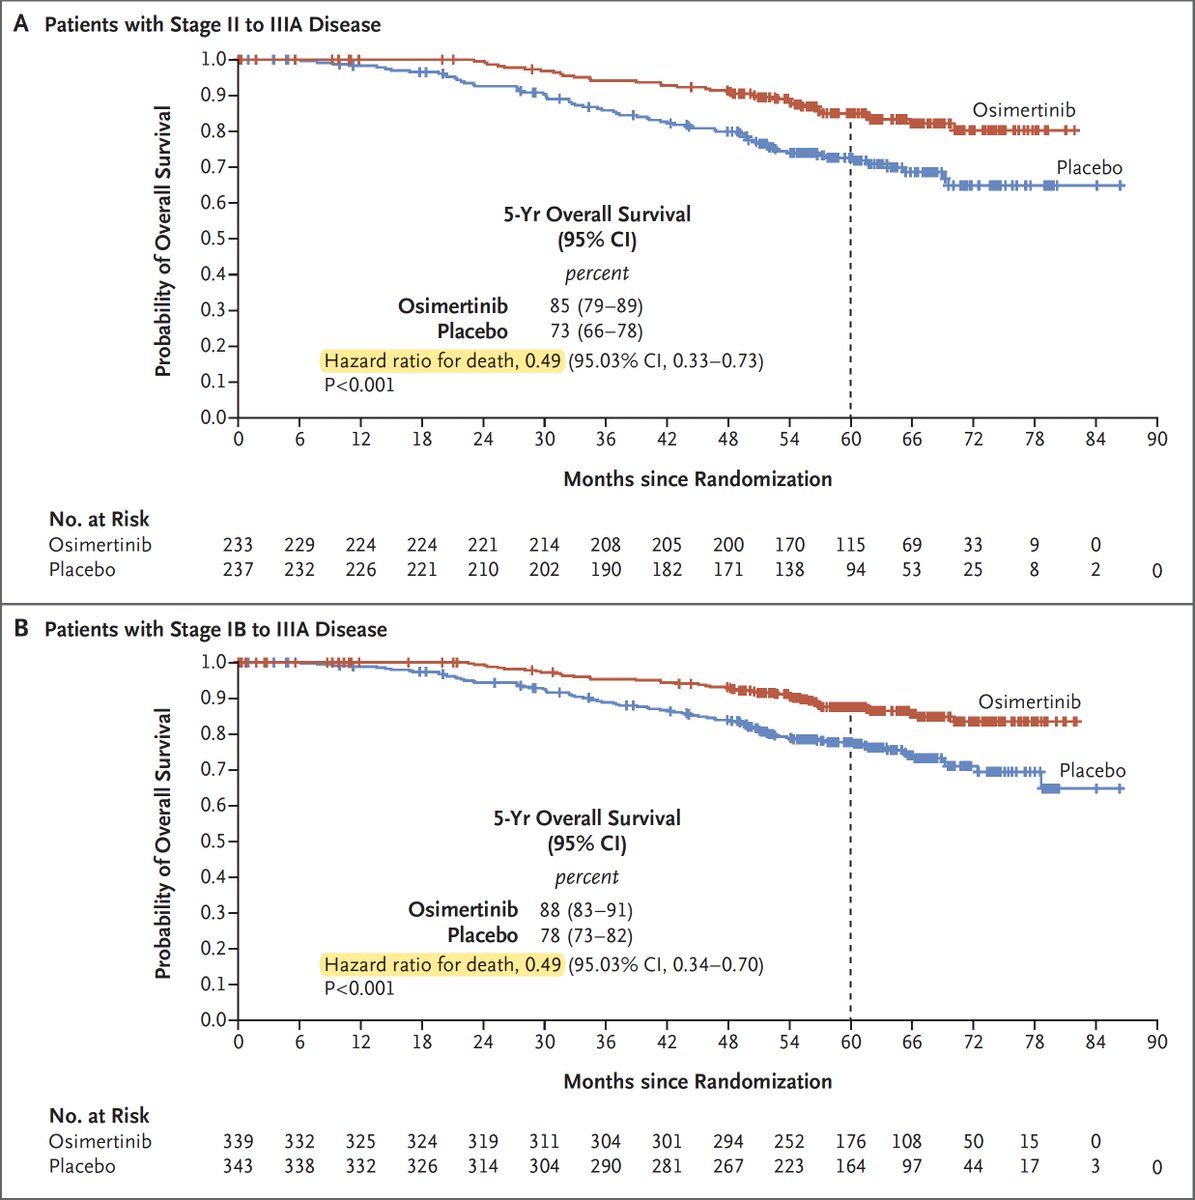 A mutation in the EGFR gene is found in ~25% of lung cancers. Reported @NEJM and @ASCO today: a pill directed at this mutation cut deaths by 50% through 5 years in a randomized trial following surgical resection nejm.org/doi/full/10.10…